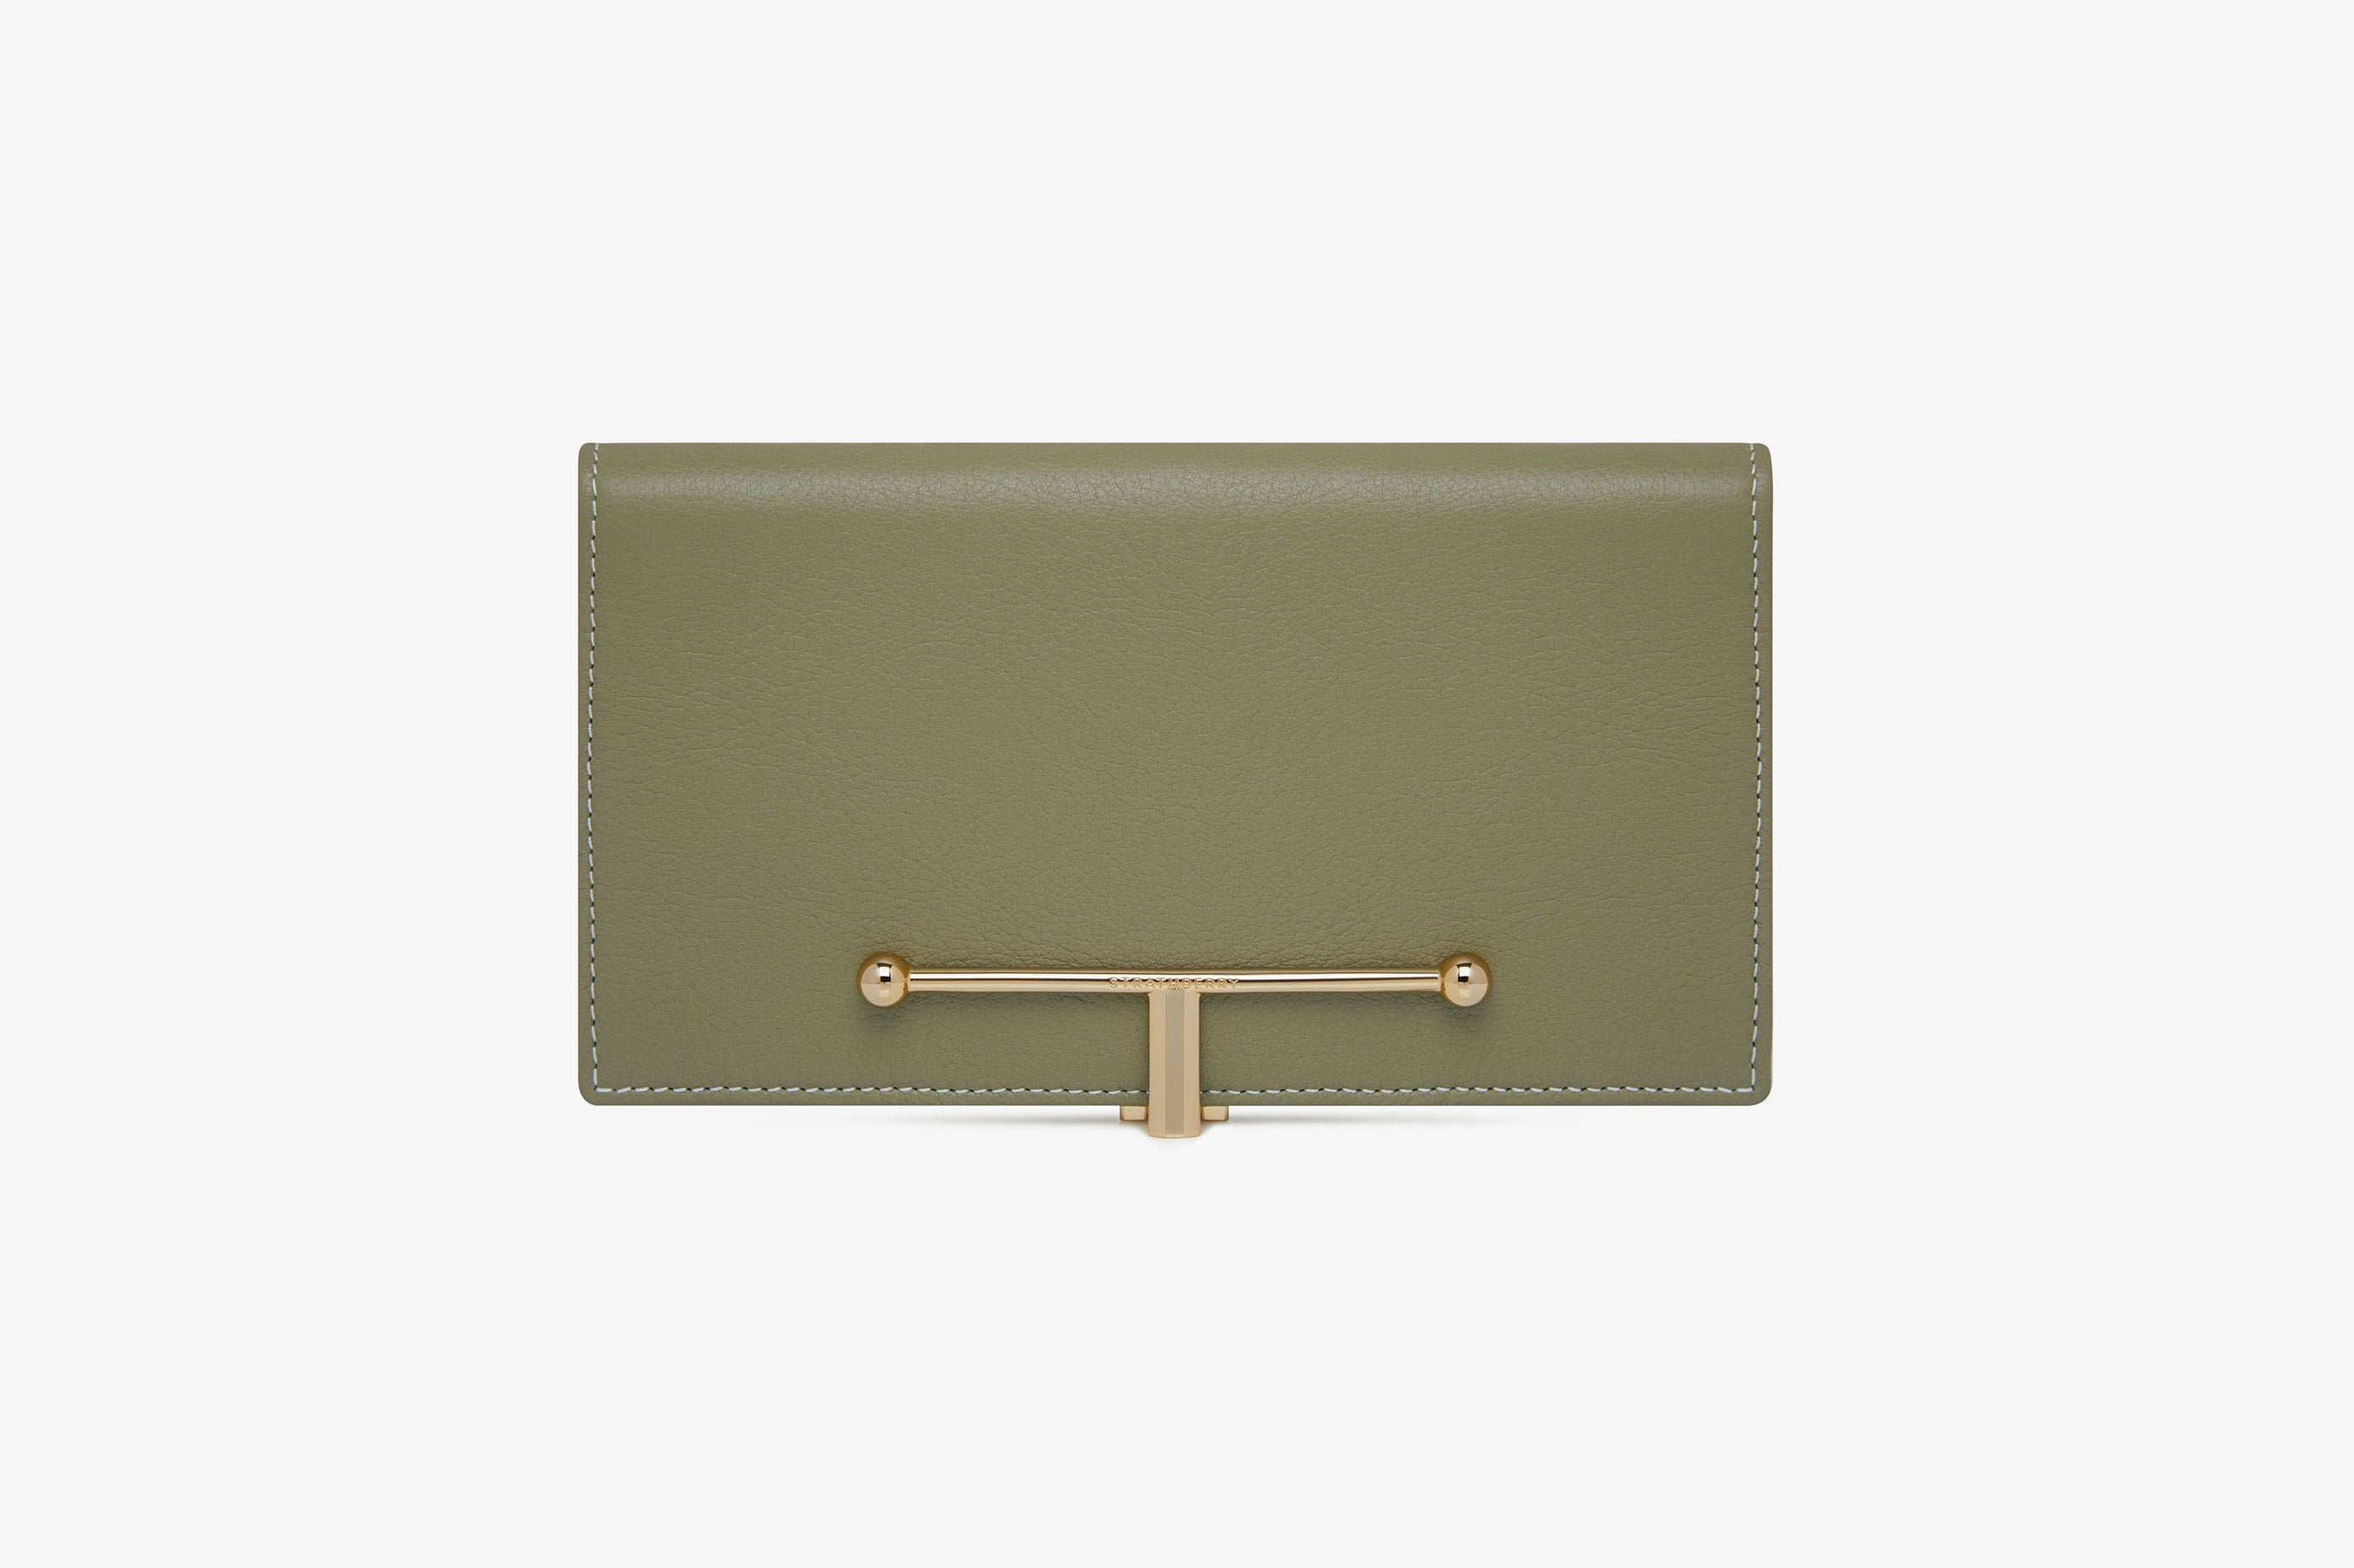 A view showcasing our Large Melville Street Wallet - Pistachio/Vanilla Thread